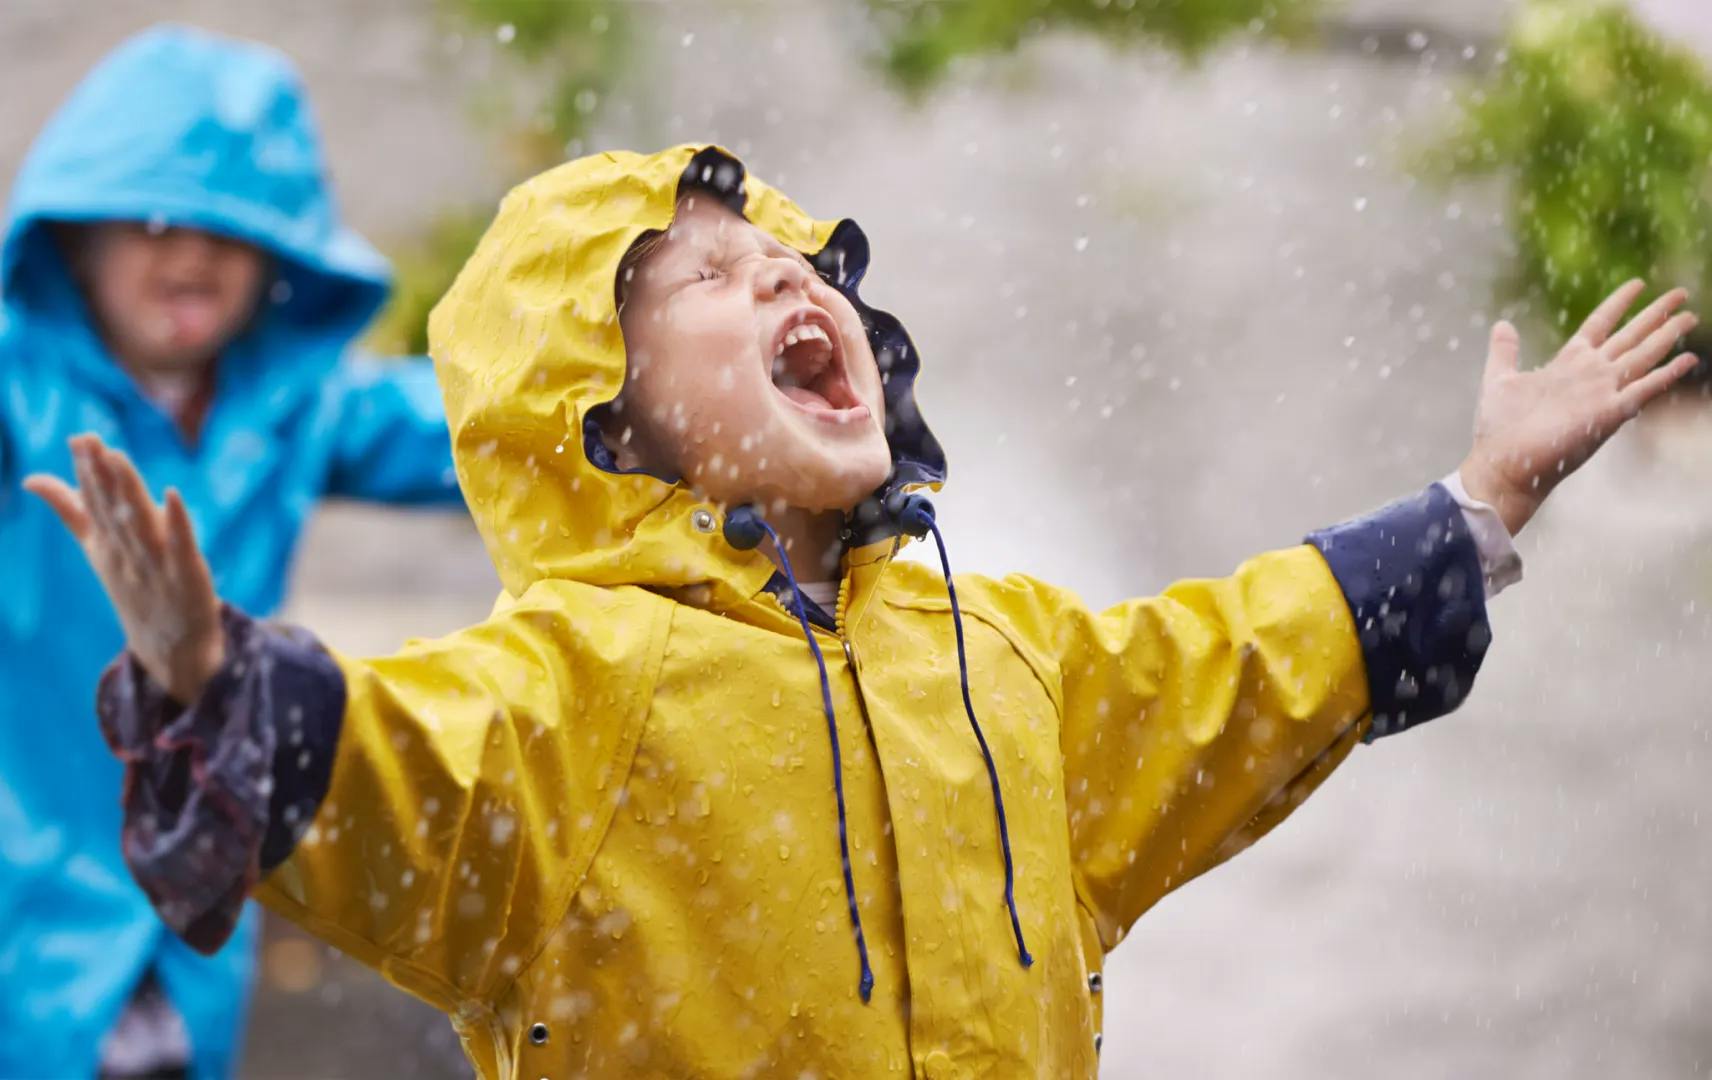 Child playing in a yellow rain jacket